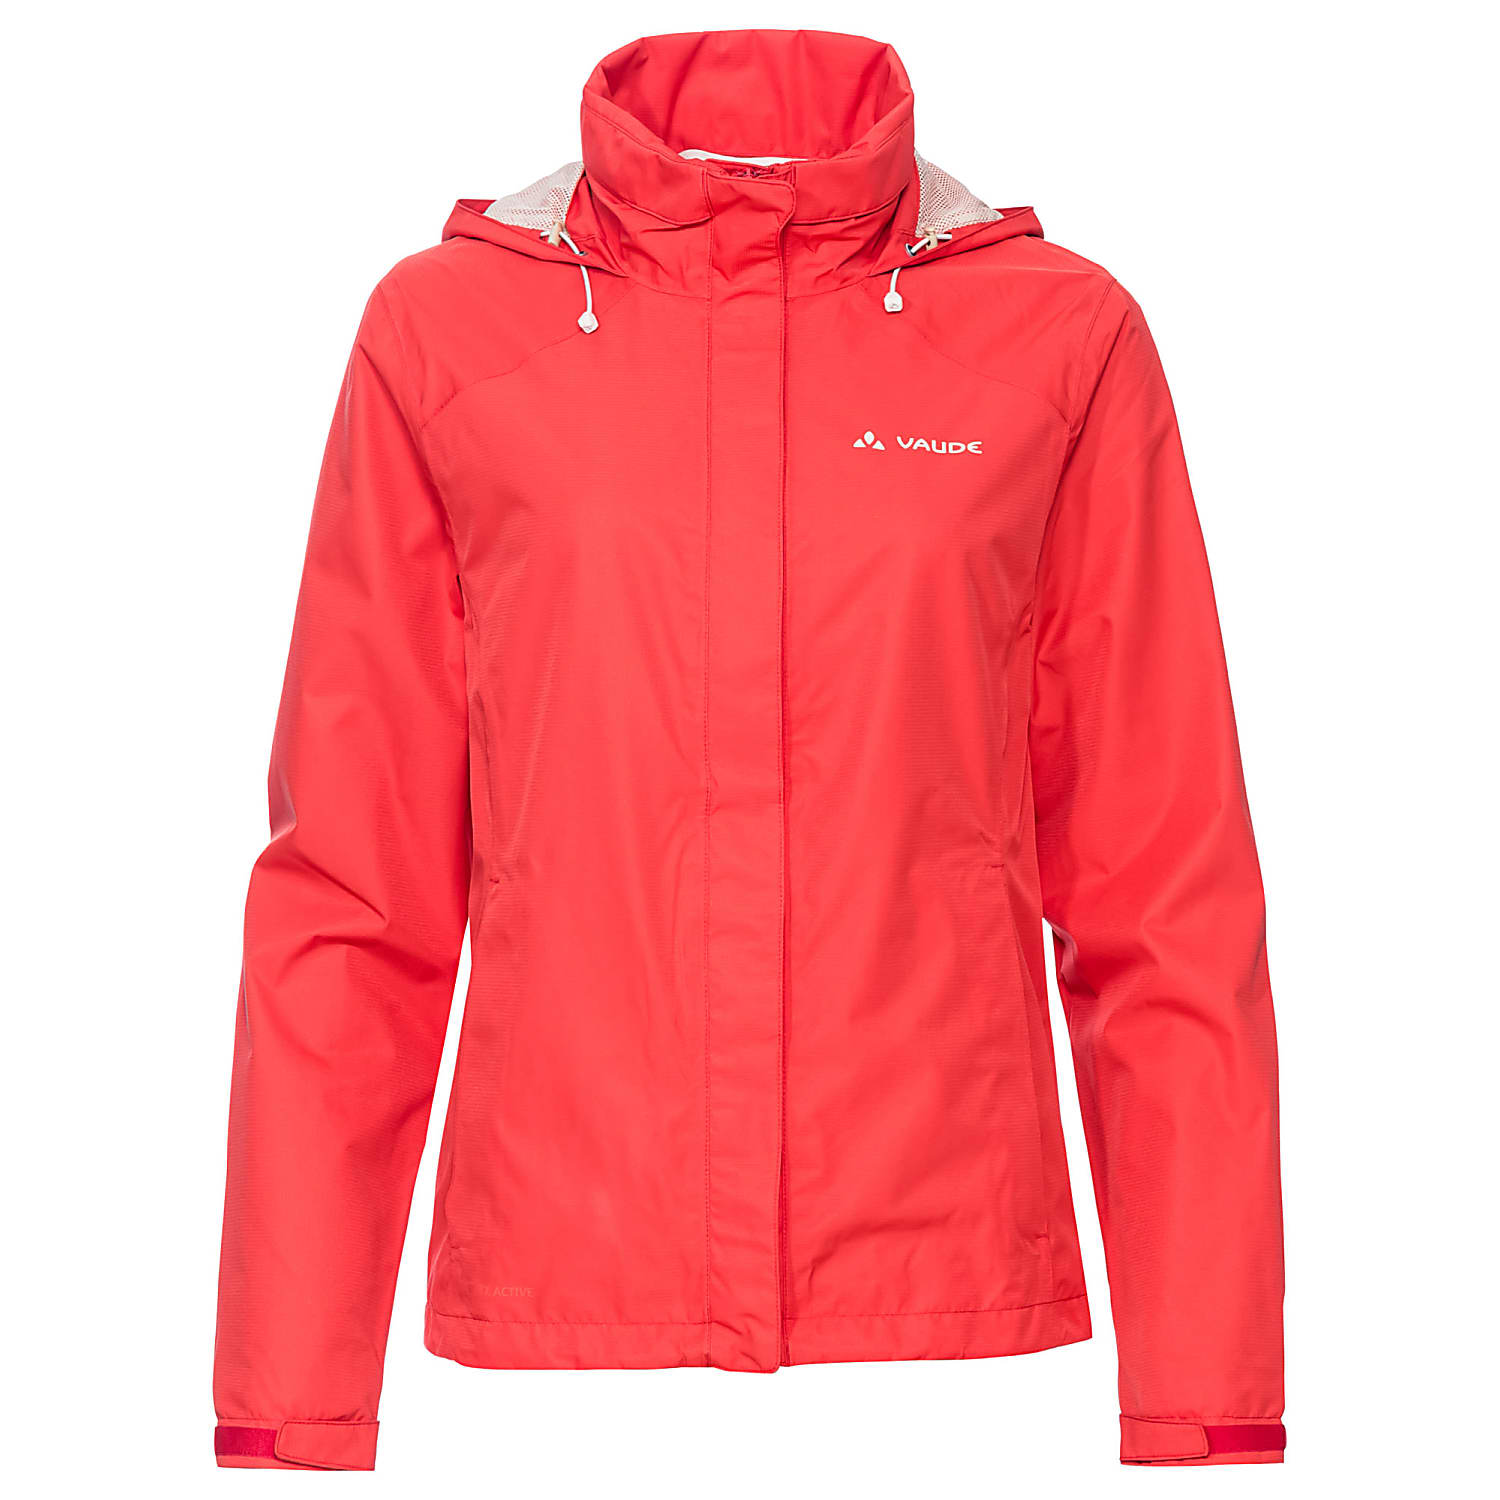 Vaude WOMENS ESCAPE Flame Fast BIKE cheap LIGHT - JACKET, and shipping